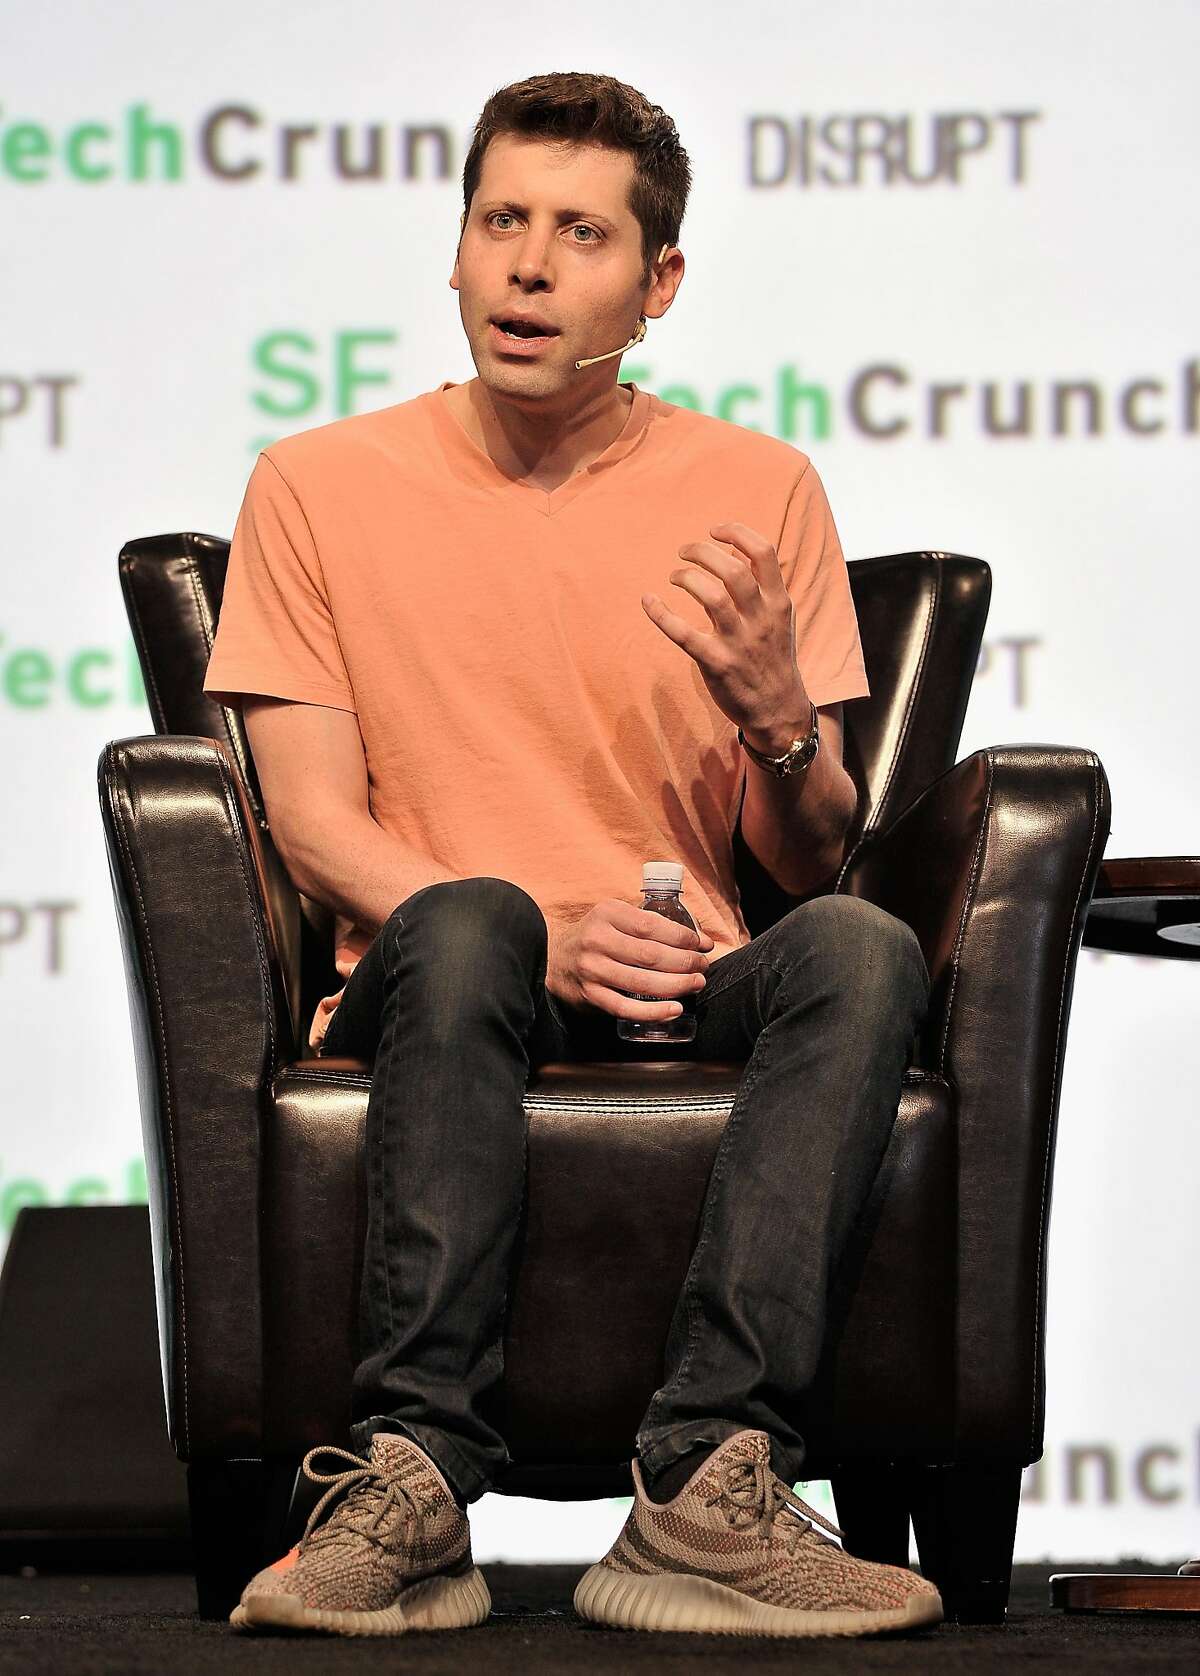 SAN FRANCISCO, CA - SEPTEMBER 19: Y Combinator President Sam Altman speaks onstage during TechCrunch Disrupt SF 2017 at Pier 48 on September 19, 2017 in San Francisco, California. (Photo by Steve Jennings/Getty Images for TechCrunch)